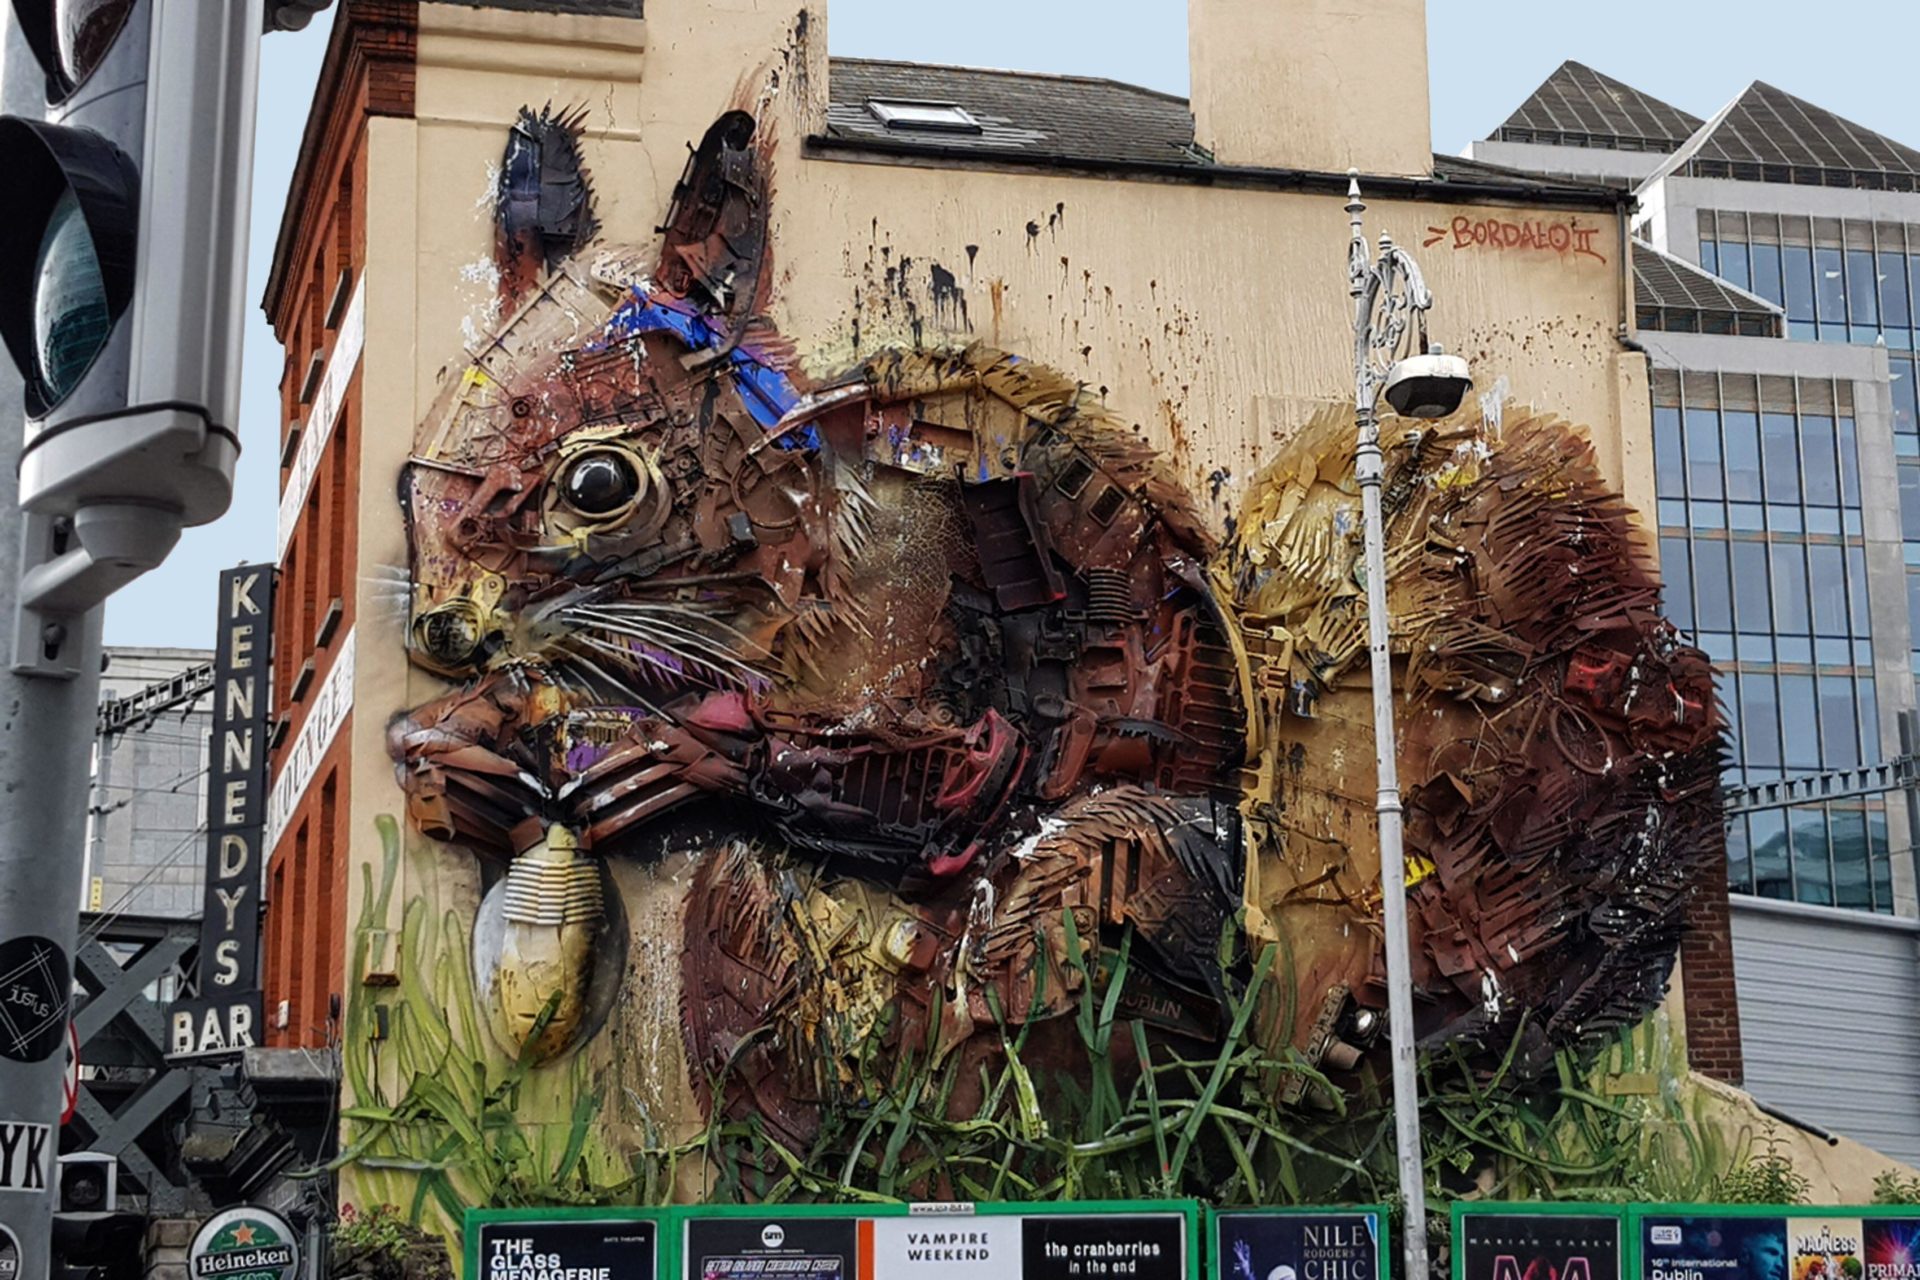 ‘It creates pride of place’ – Do our cities need more street art?